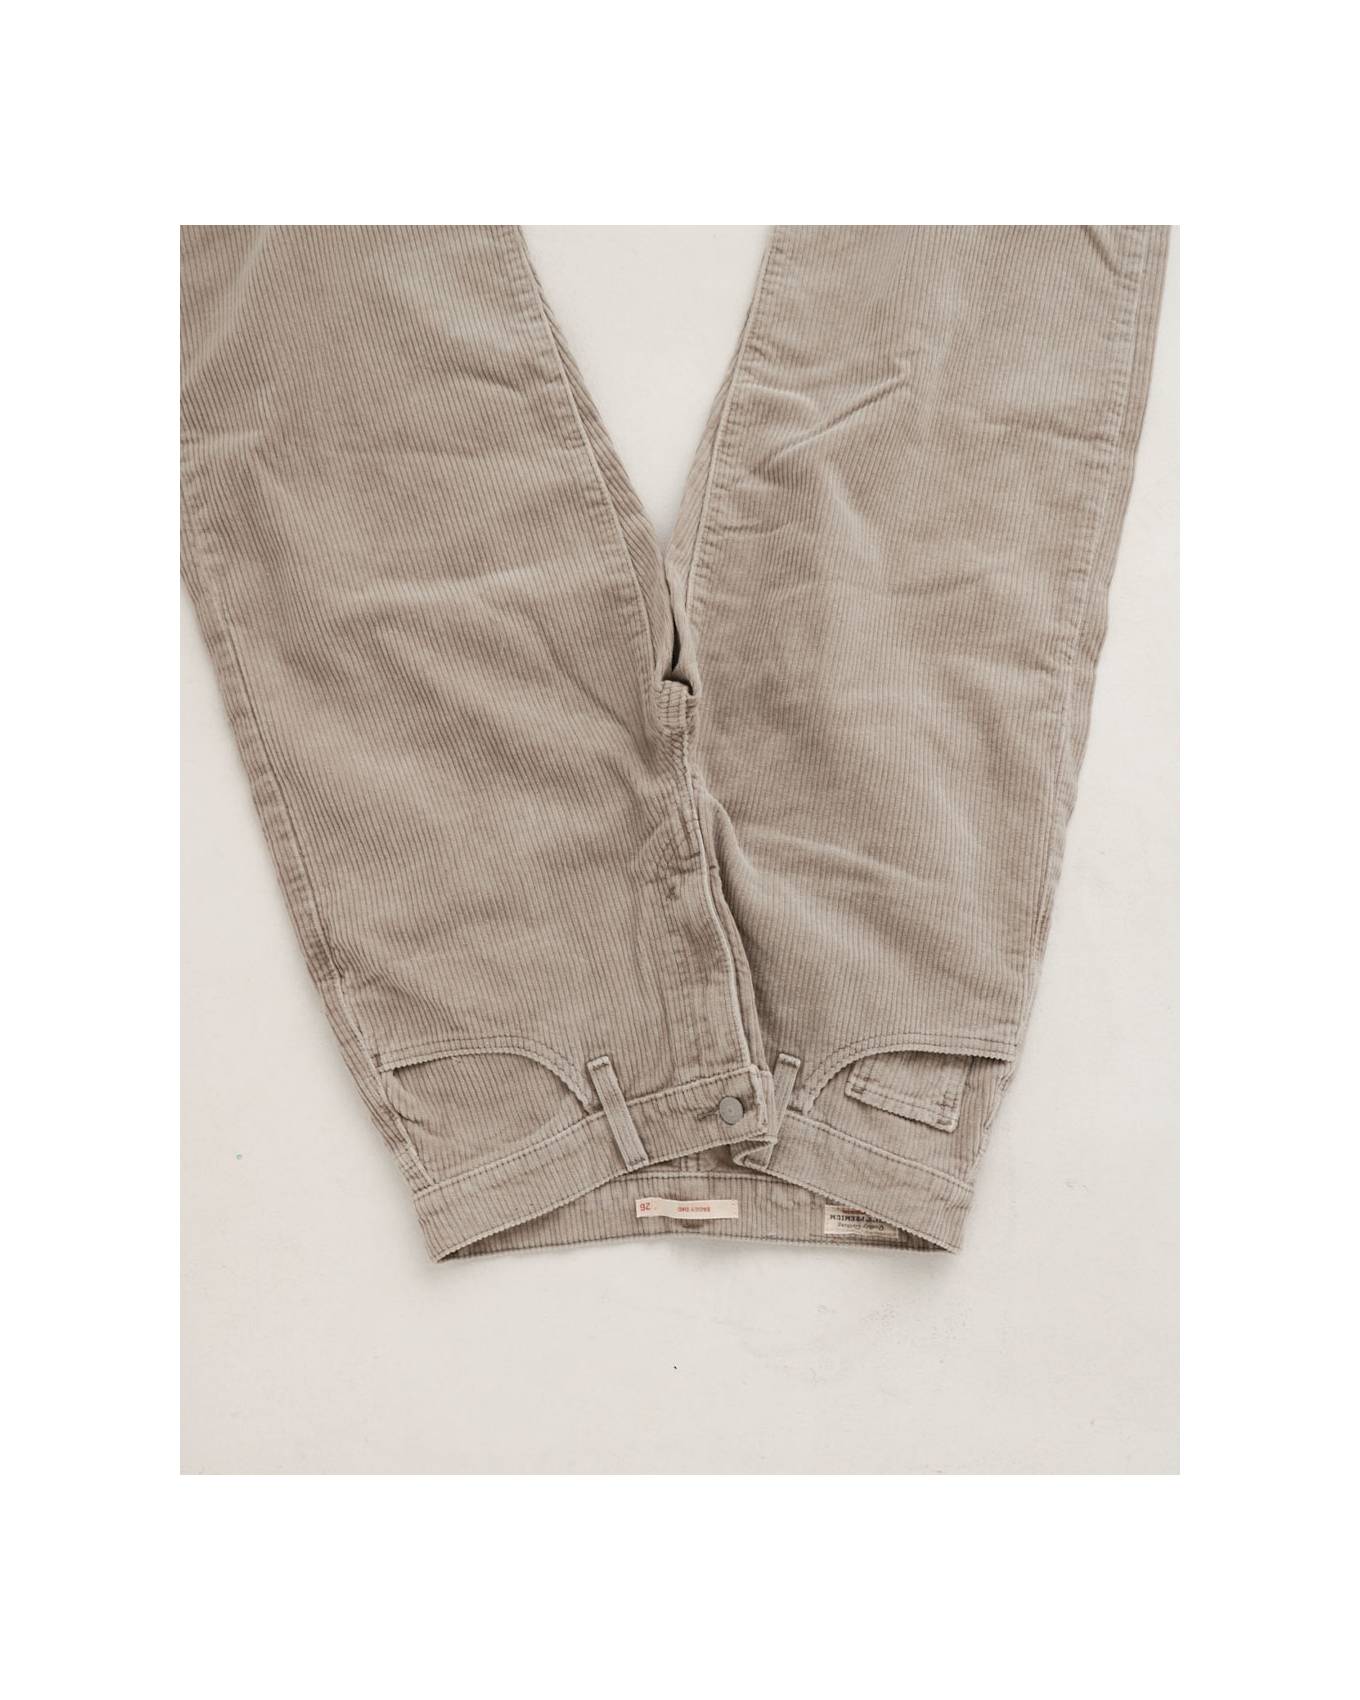 Flat lay of one of Luann's selected items - the Baggy Dad Corduroy Jeans in a light tan wash